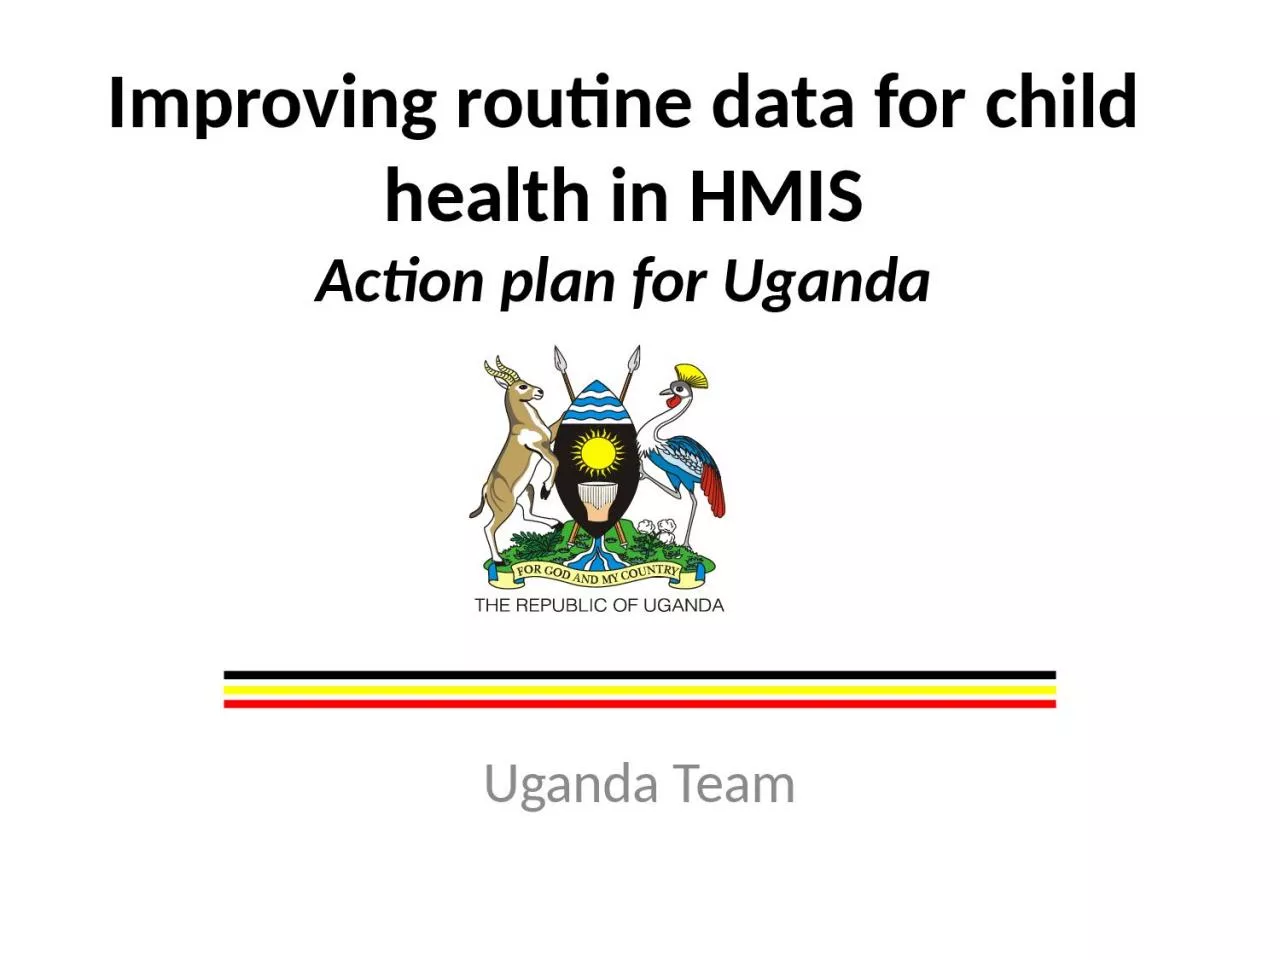 Improving routine data for child health in HMIS